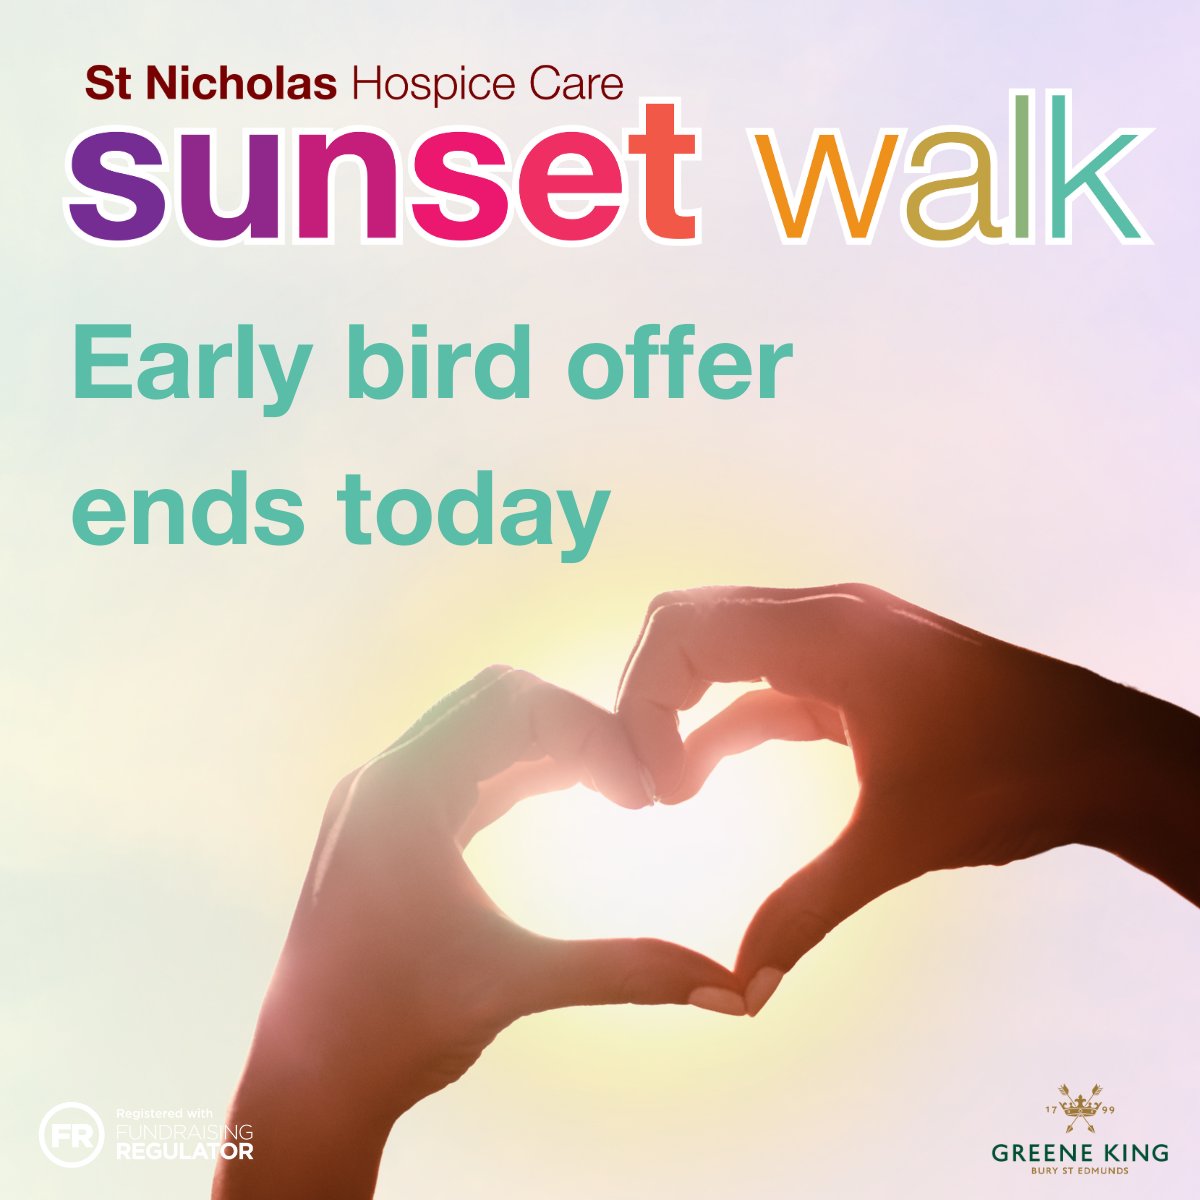 Just a few hours to catch our early bird offer, which ends today! Sign up now and join us to walk a 10 or 15km route around Bury St Edmunds on 22 June at our Sunset Walk – we can't wait to see you there. ow.ly/FEZf50QYNZM #SunsetWalk